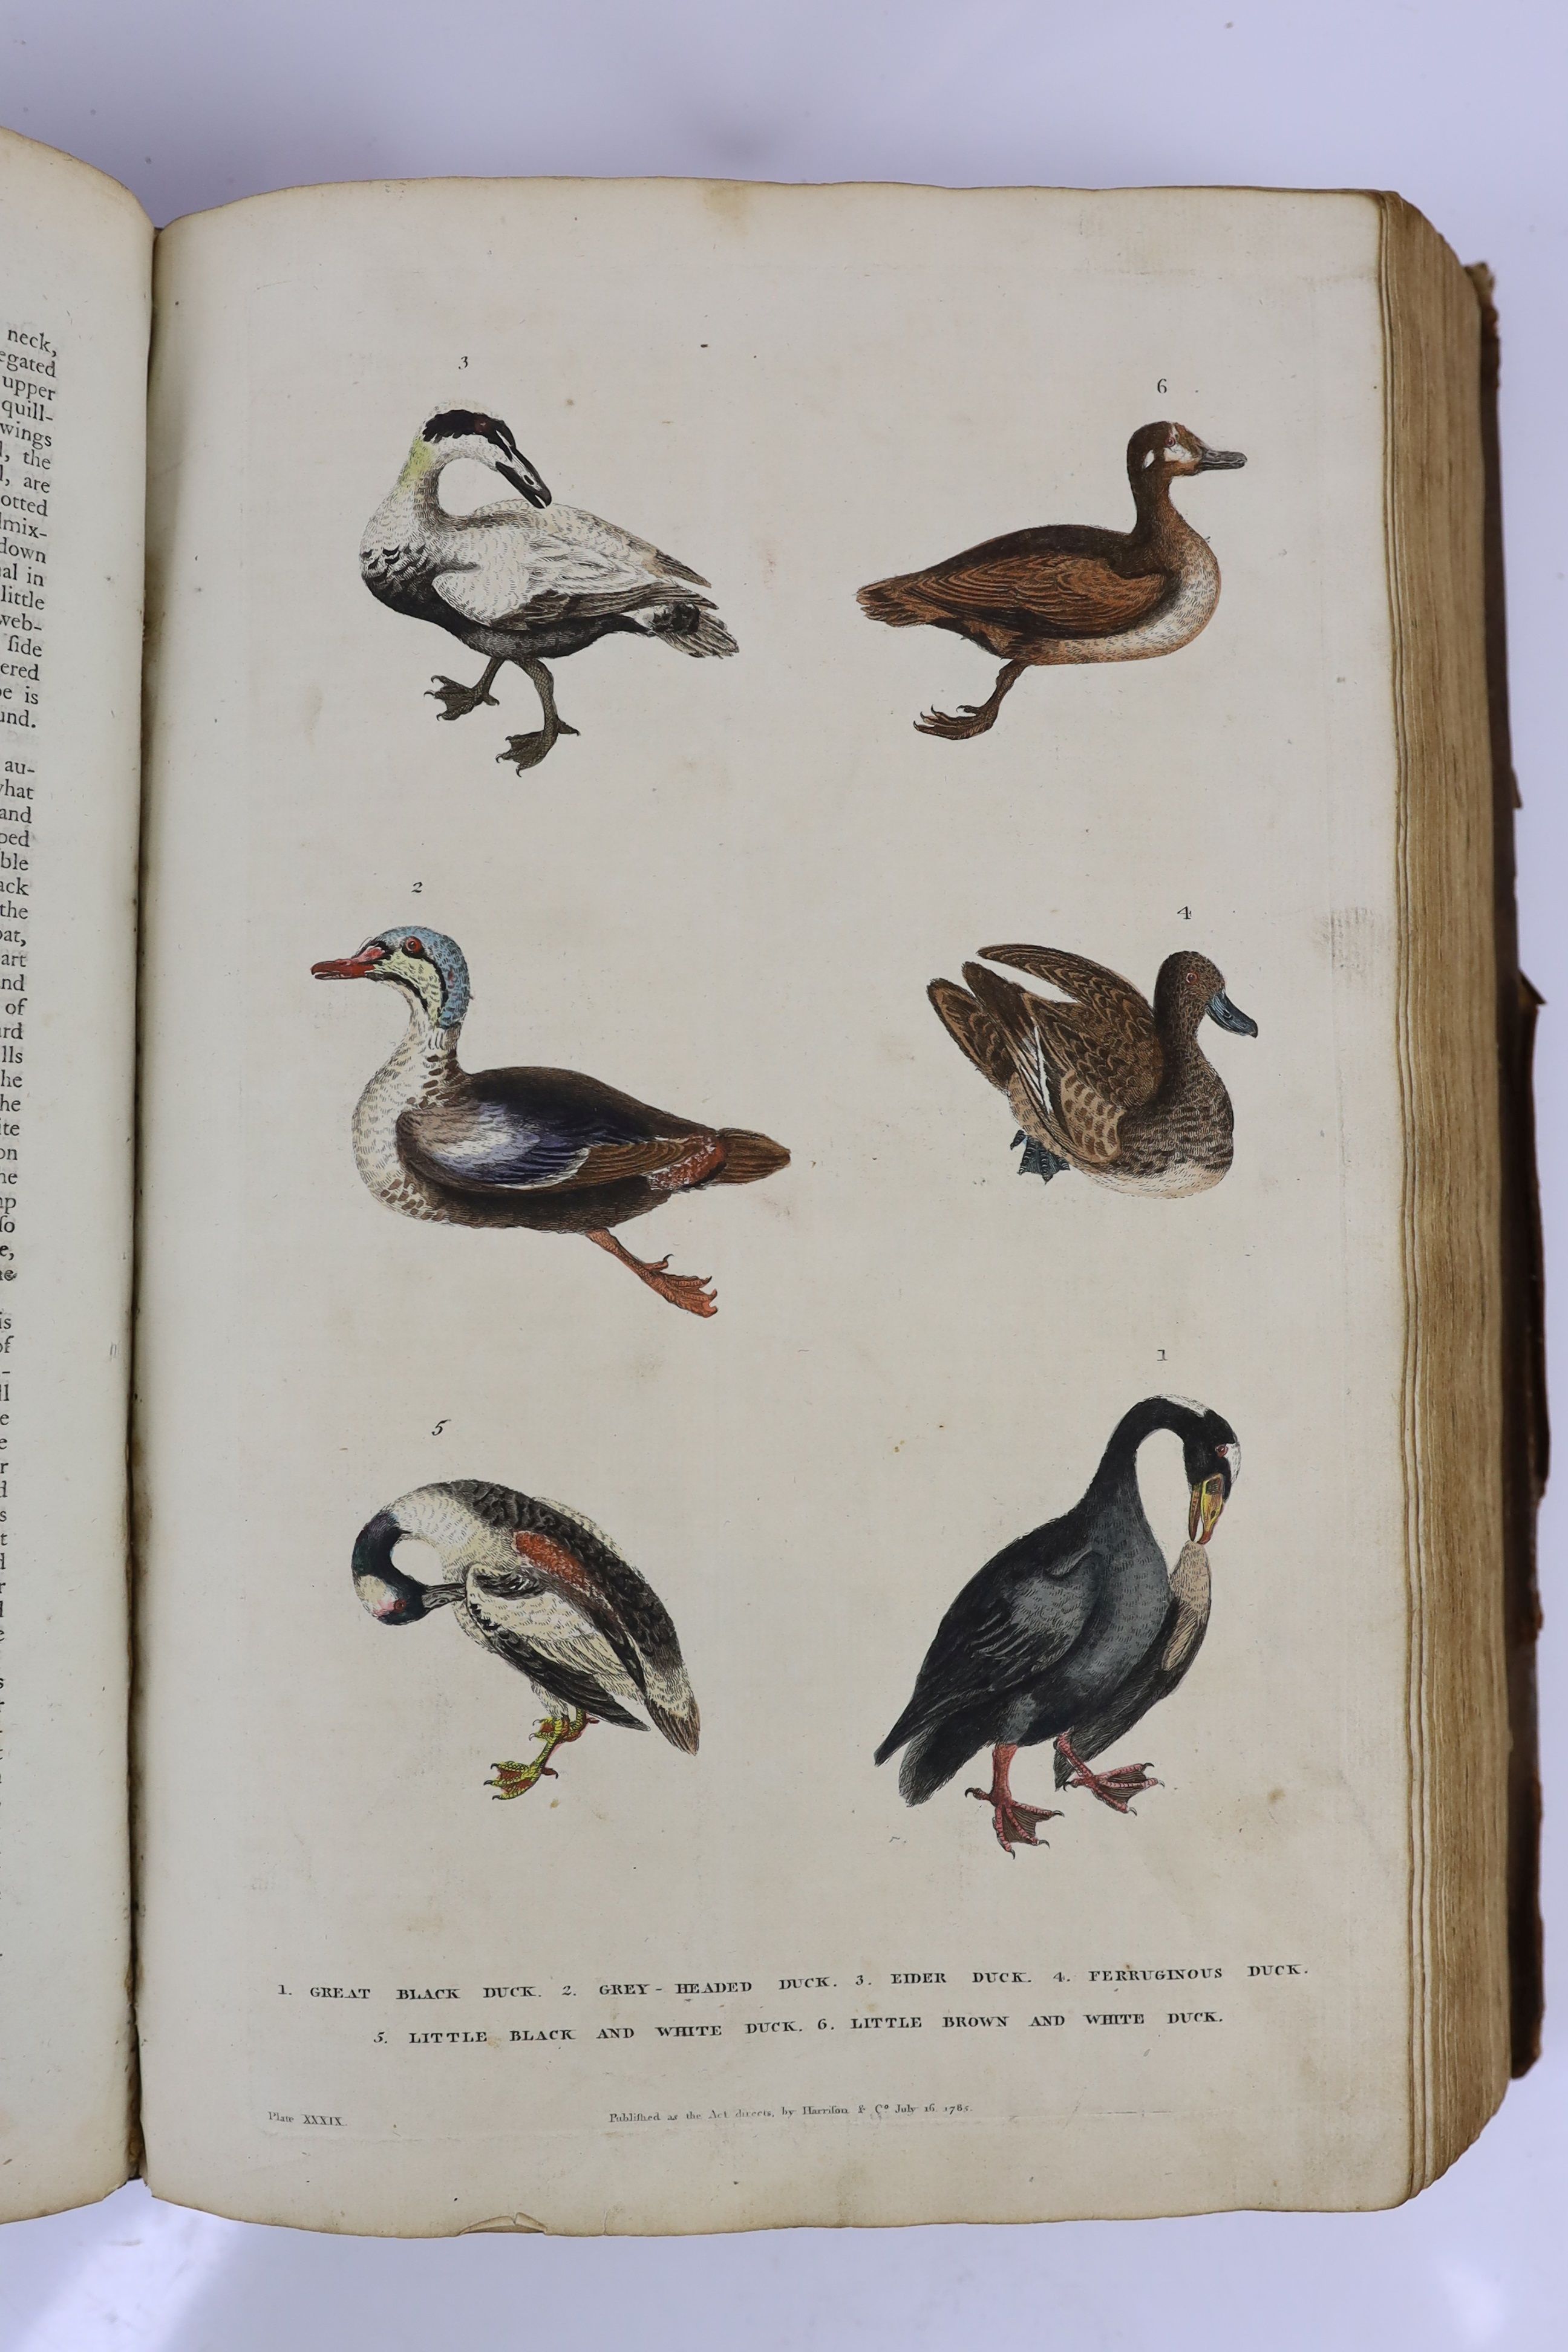 [Mavor, William Fordyce] - Martyn, William Frederick] - A New Dictionary of Natural History; or, Compleat Universal Display of Animated Nature, 2 vols. in one, folio, calf, with 100 (TO BE VERIFIED) hand-coloured engrave